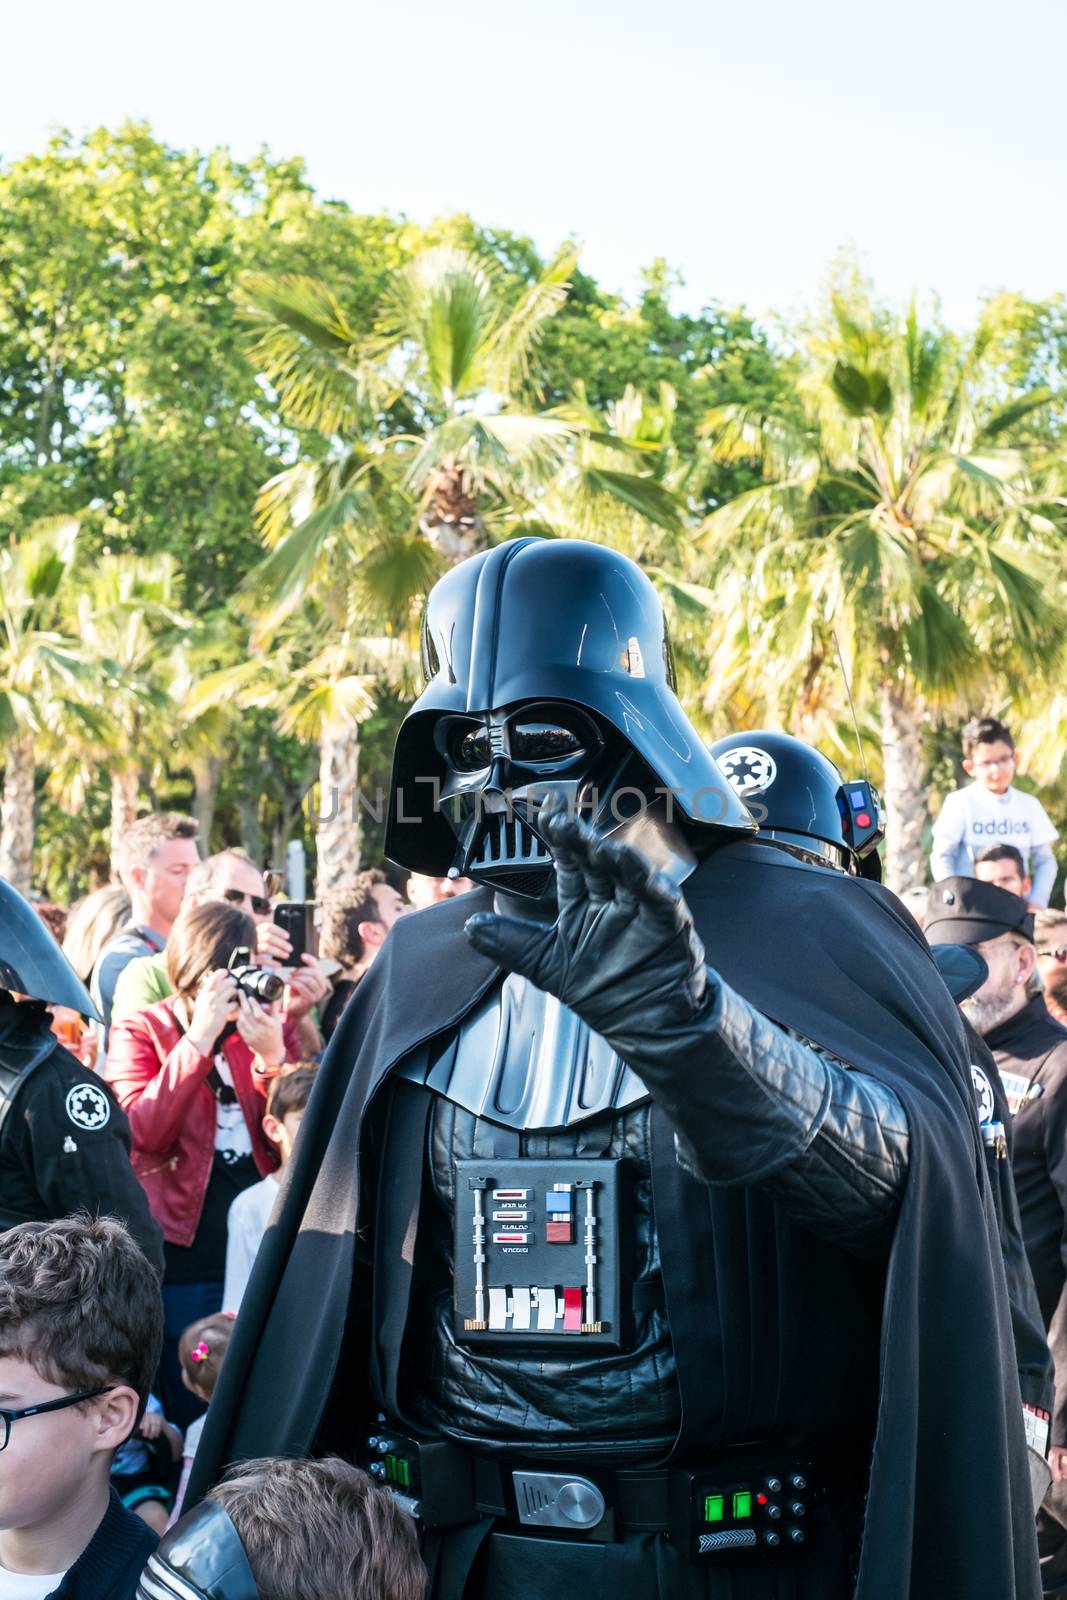 Malaga, Spain - May 05, 2018. Member of the 501st Legion Spanish Garrison dressed as Darth Vader from the movie saga Star Wars, perform along the walk Muelle Uno, Malaga, Spain